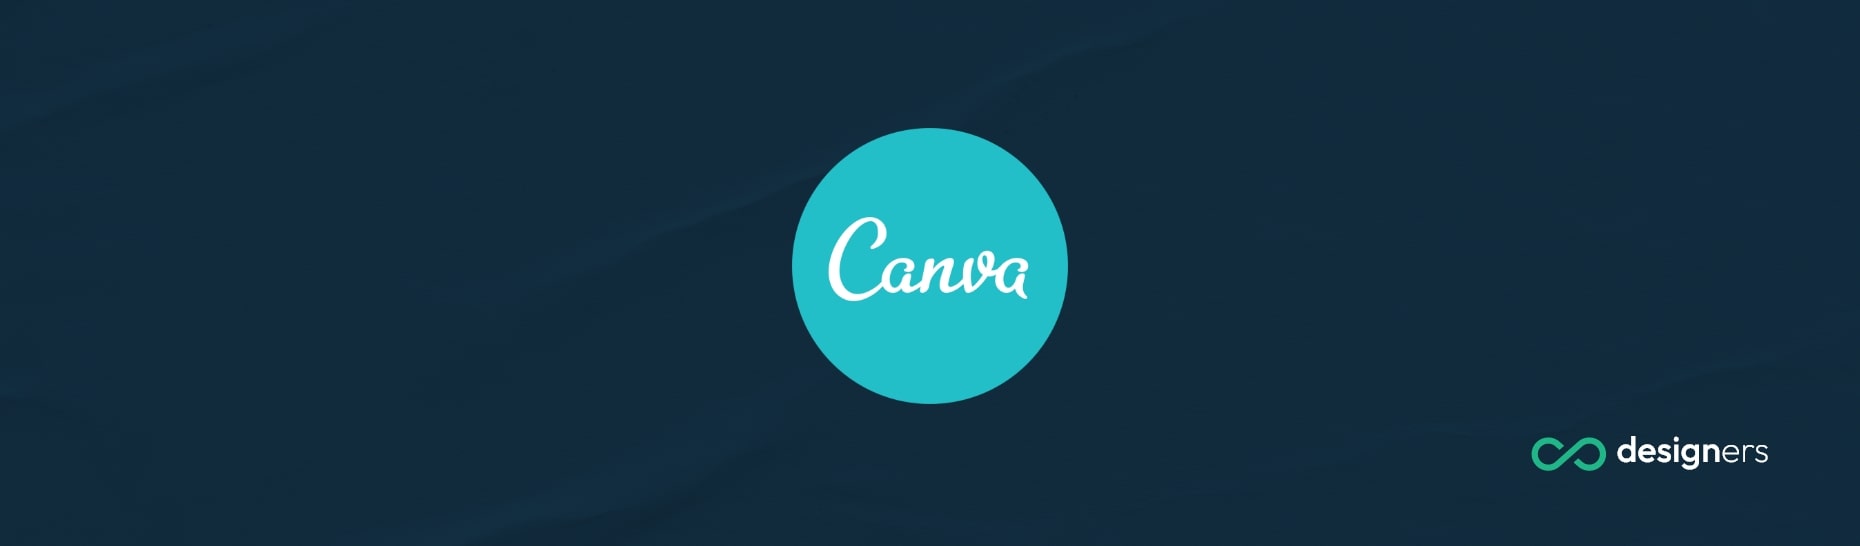 Is Canva Video Editor Free?